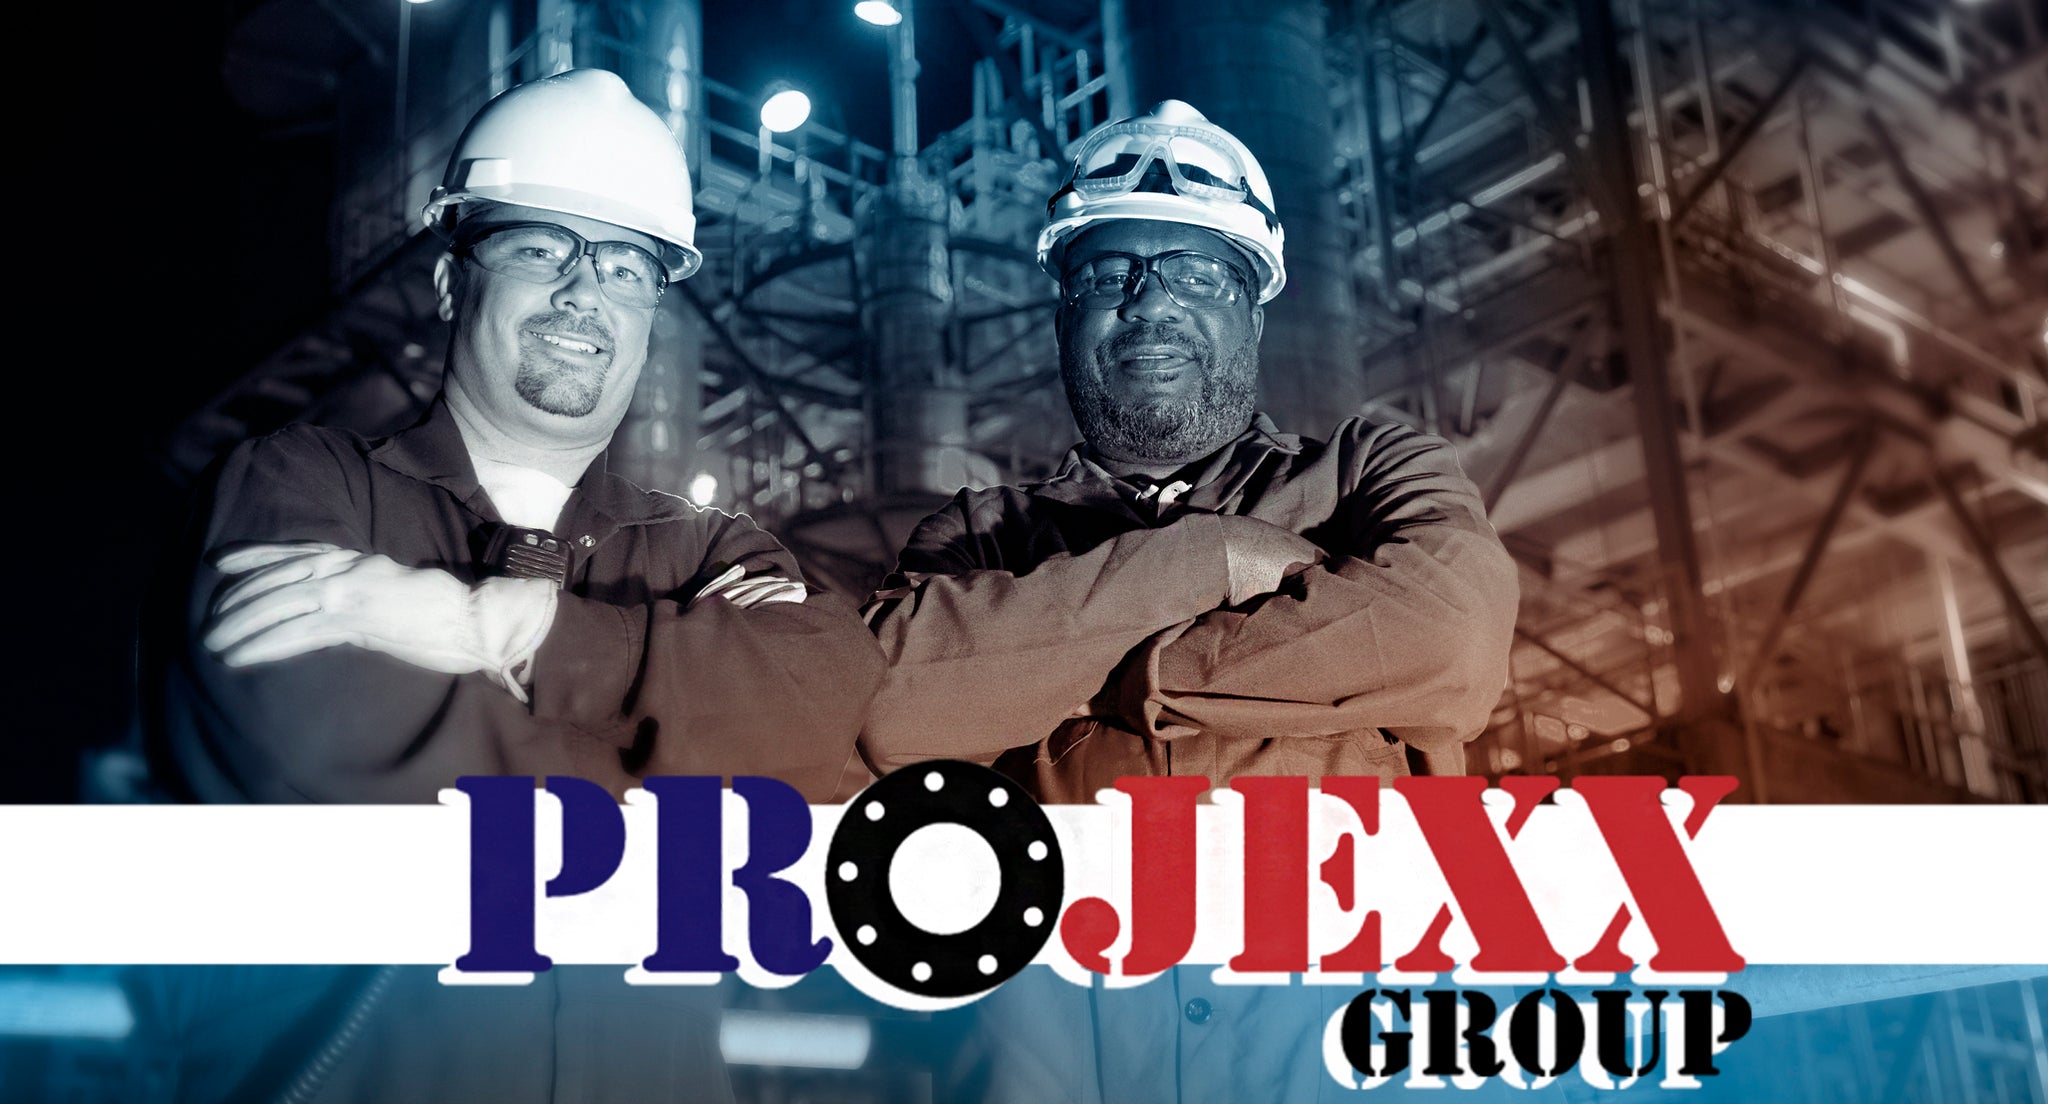 Projexx Group